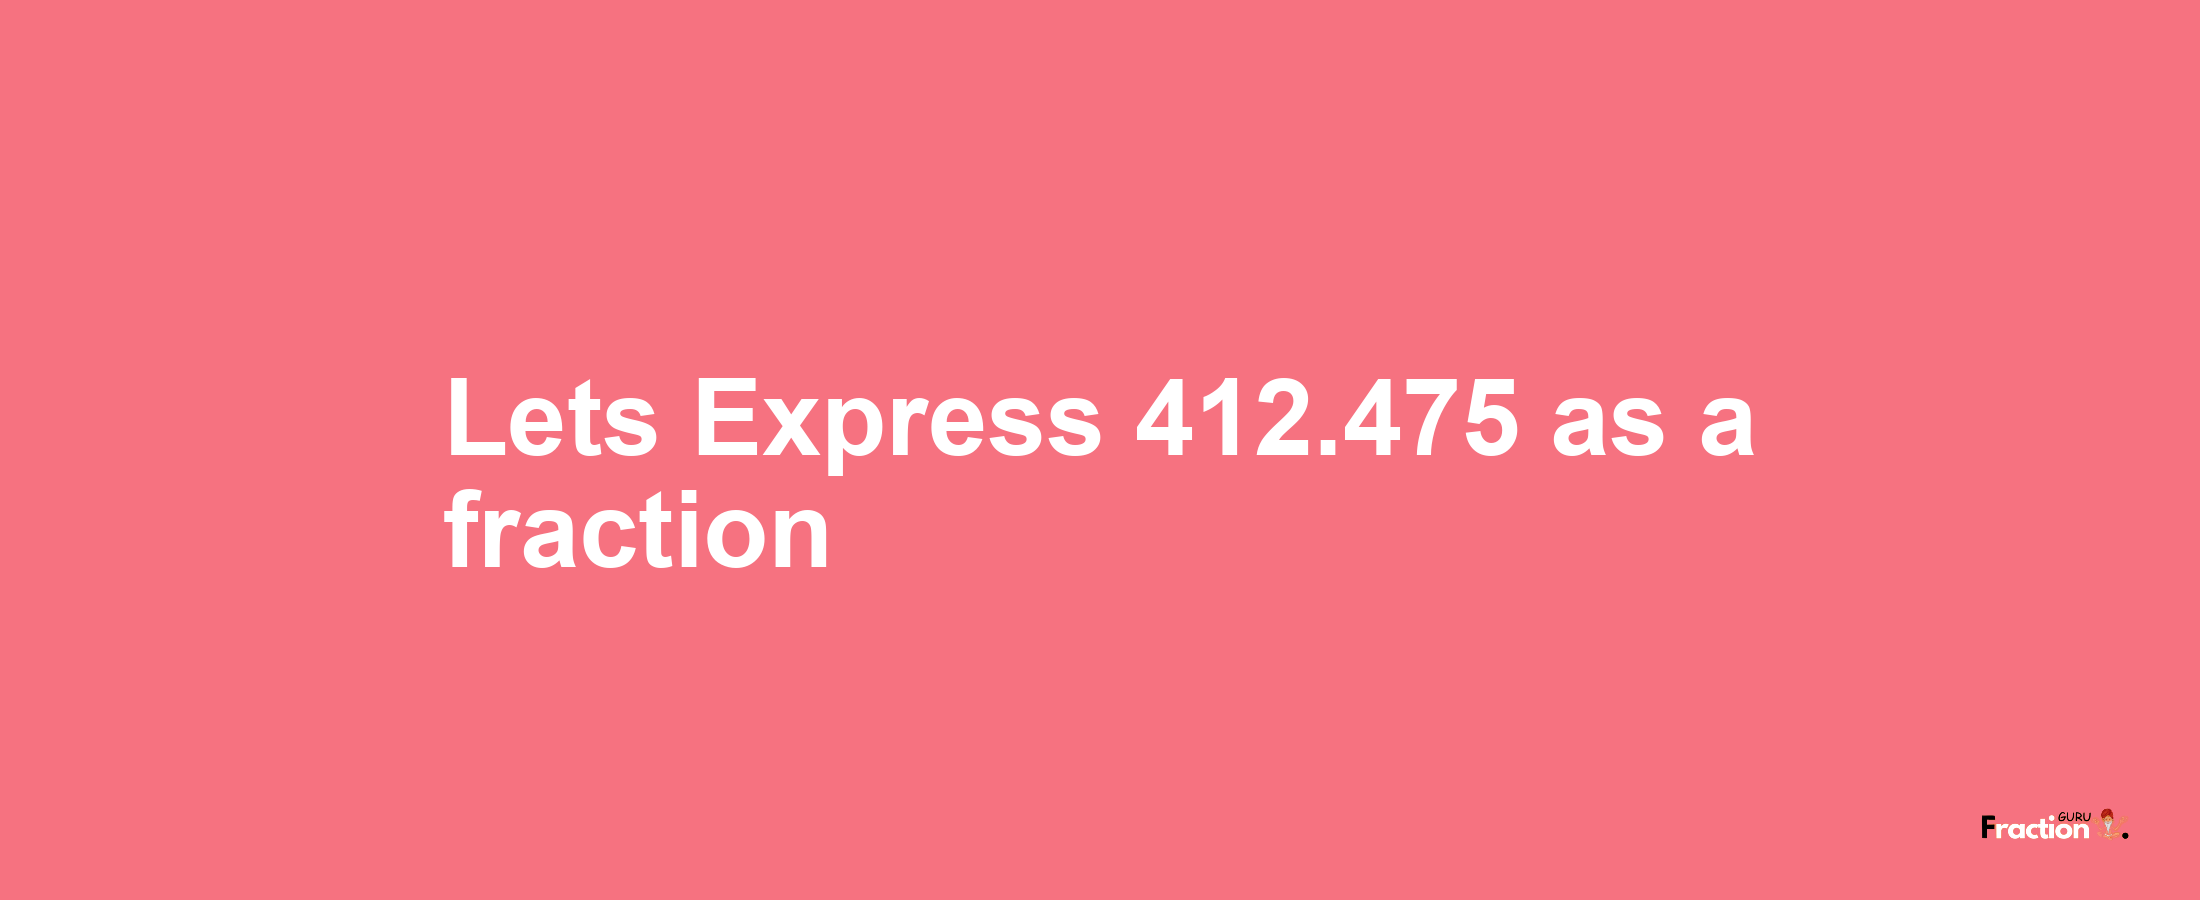 Lets Express 412.475 as afraction